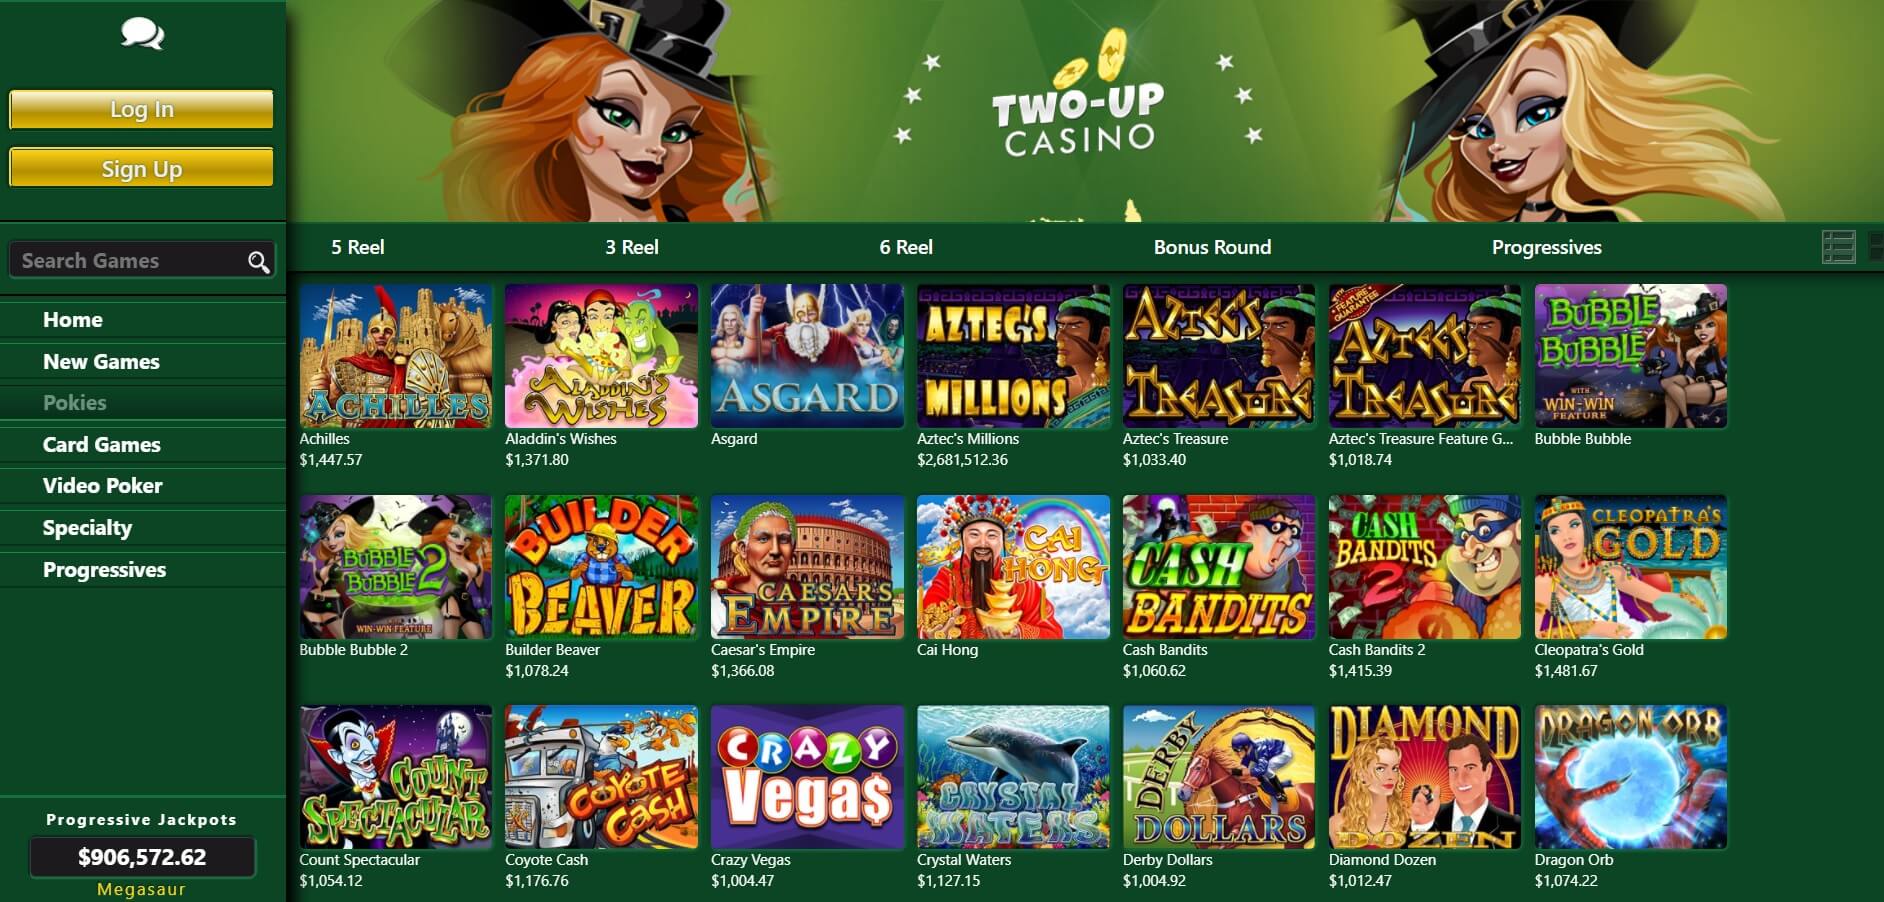 two up casino games and pokies